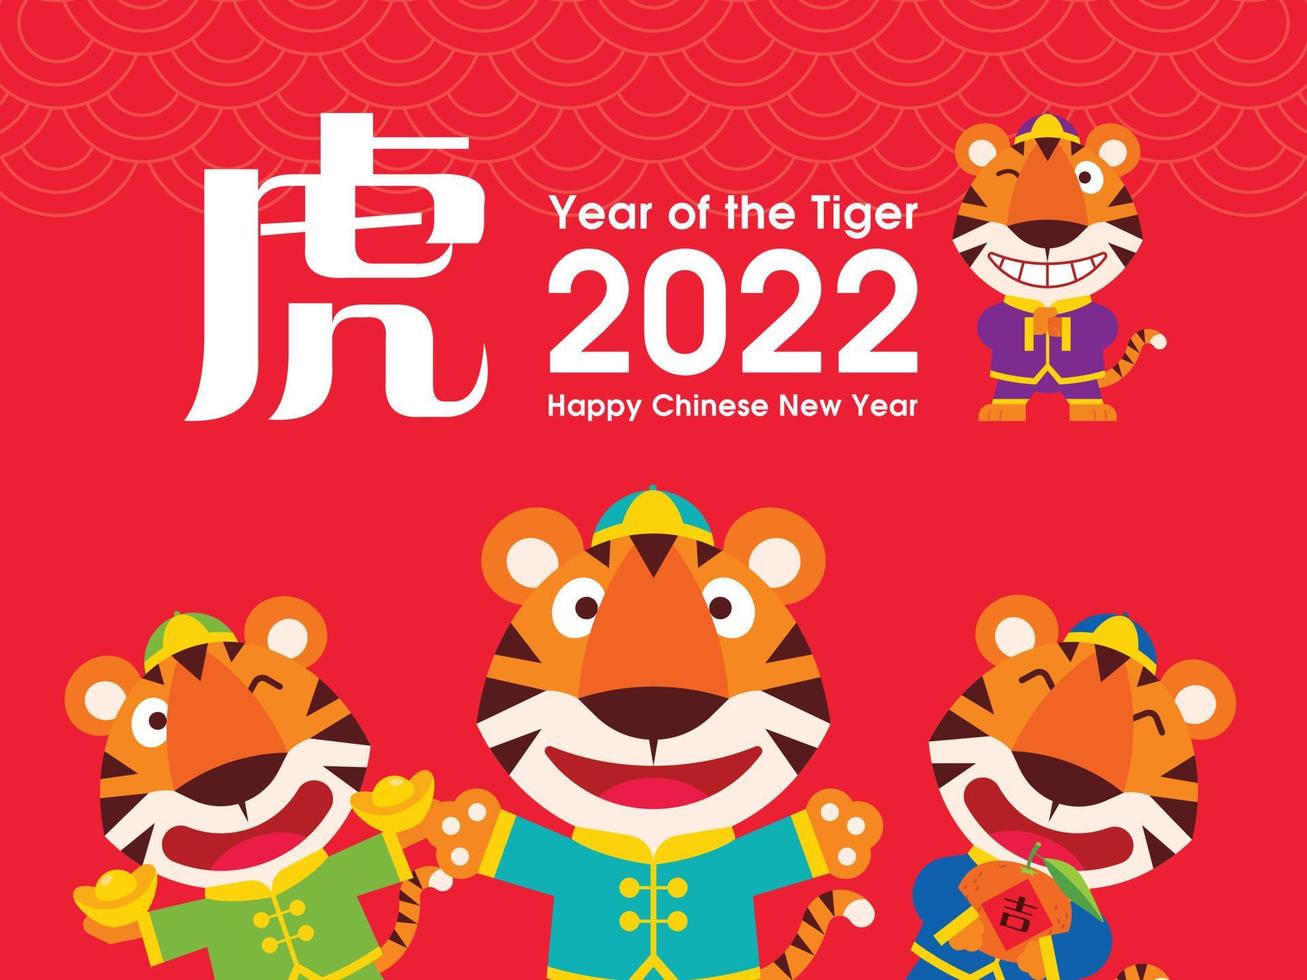 Cute tigers zodiac of Chinese New Year 202. Cartoon cute tigers in traditional costume cupping hand in greeting, holding gold ingots and carrying tangerine vector